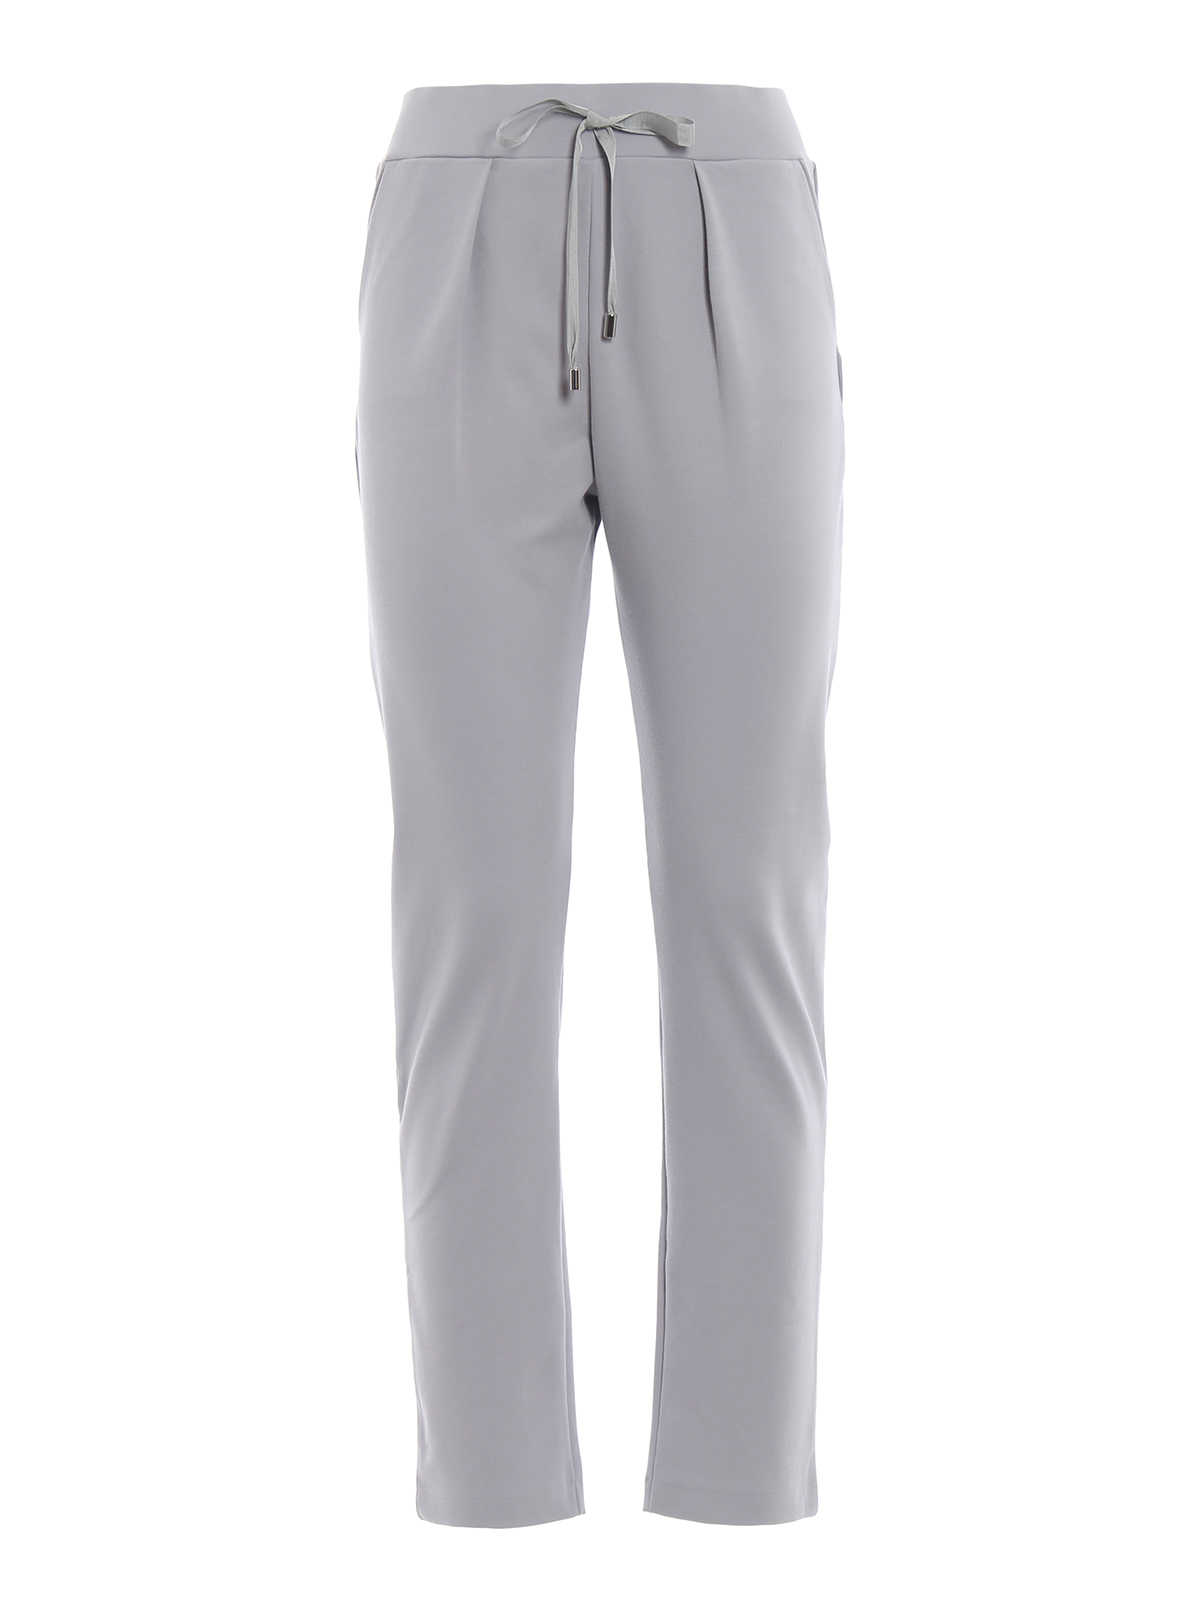 comfortable tracksuit bottoms